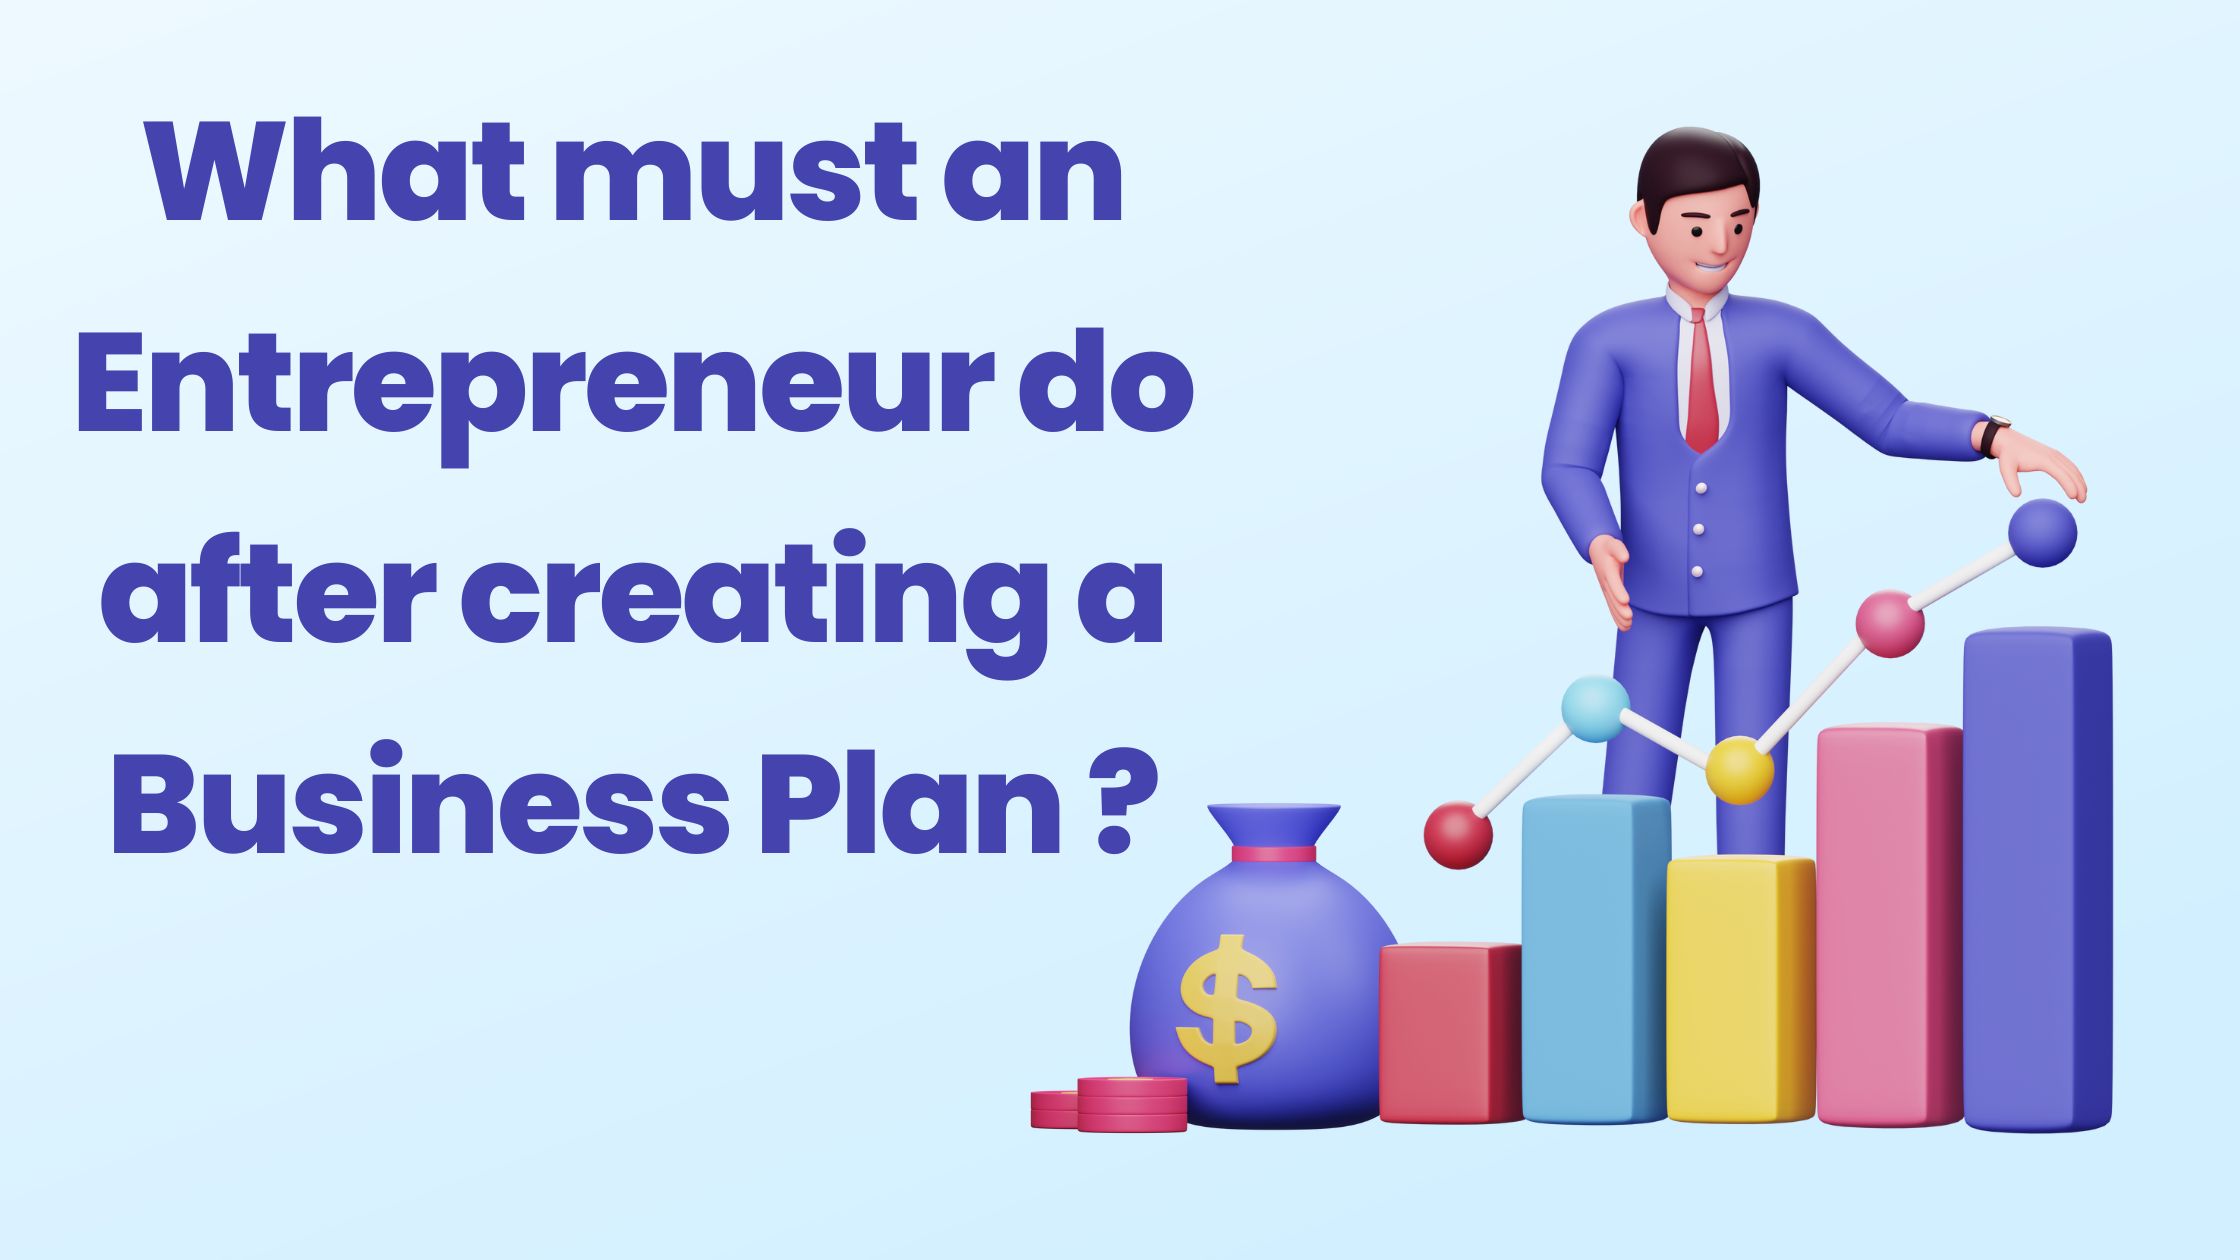 what must an entrepreneur do after creating a business plan quizlet